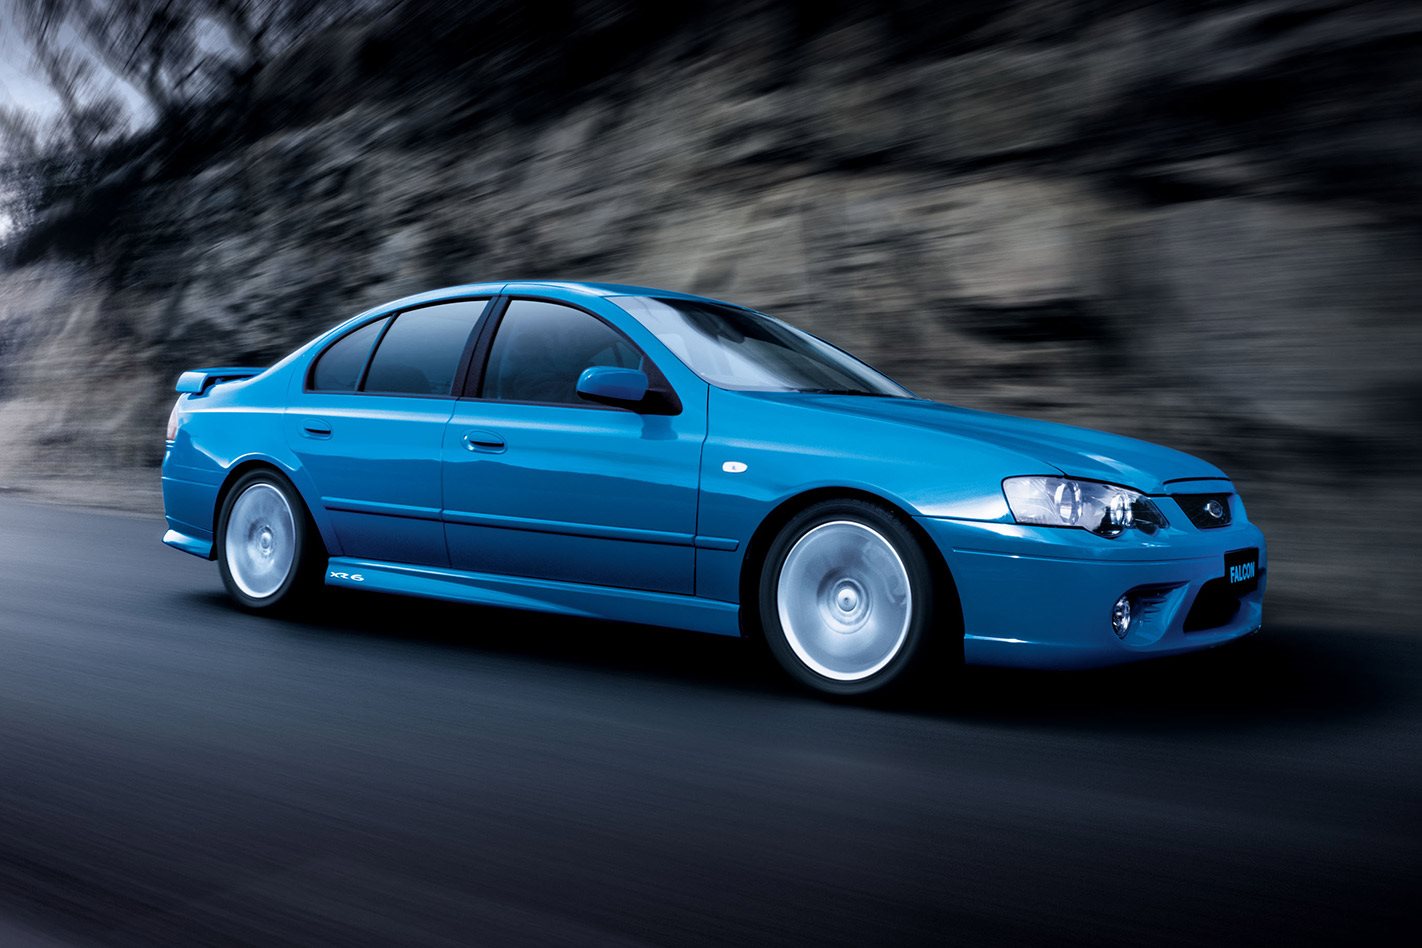 Buying Used Ford Falcon Xr6 Turbo